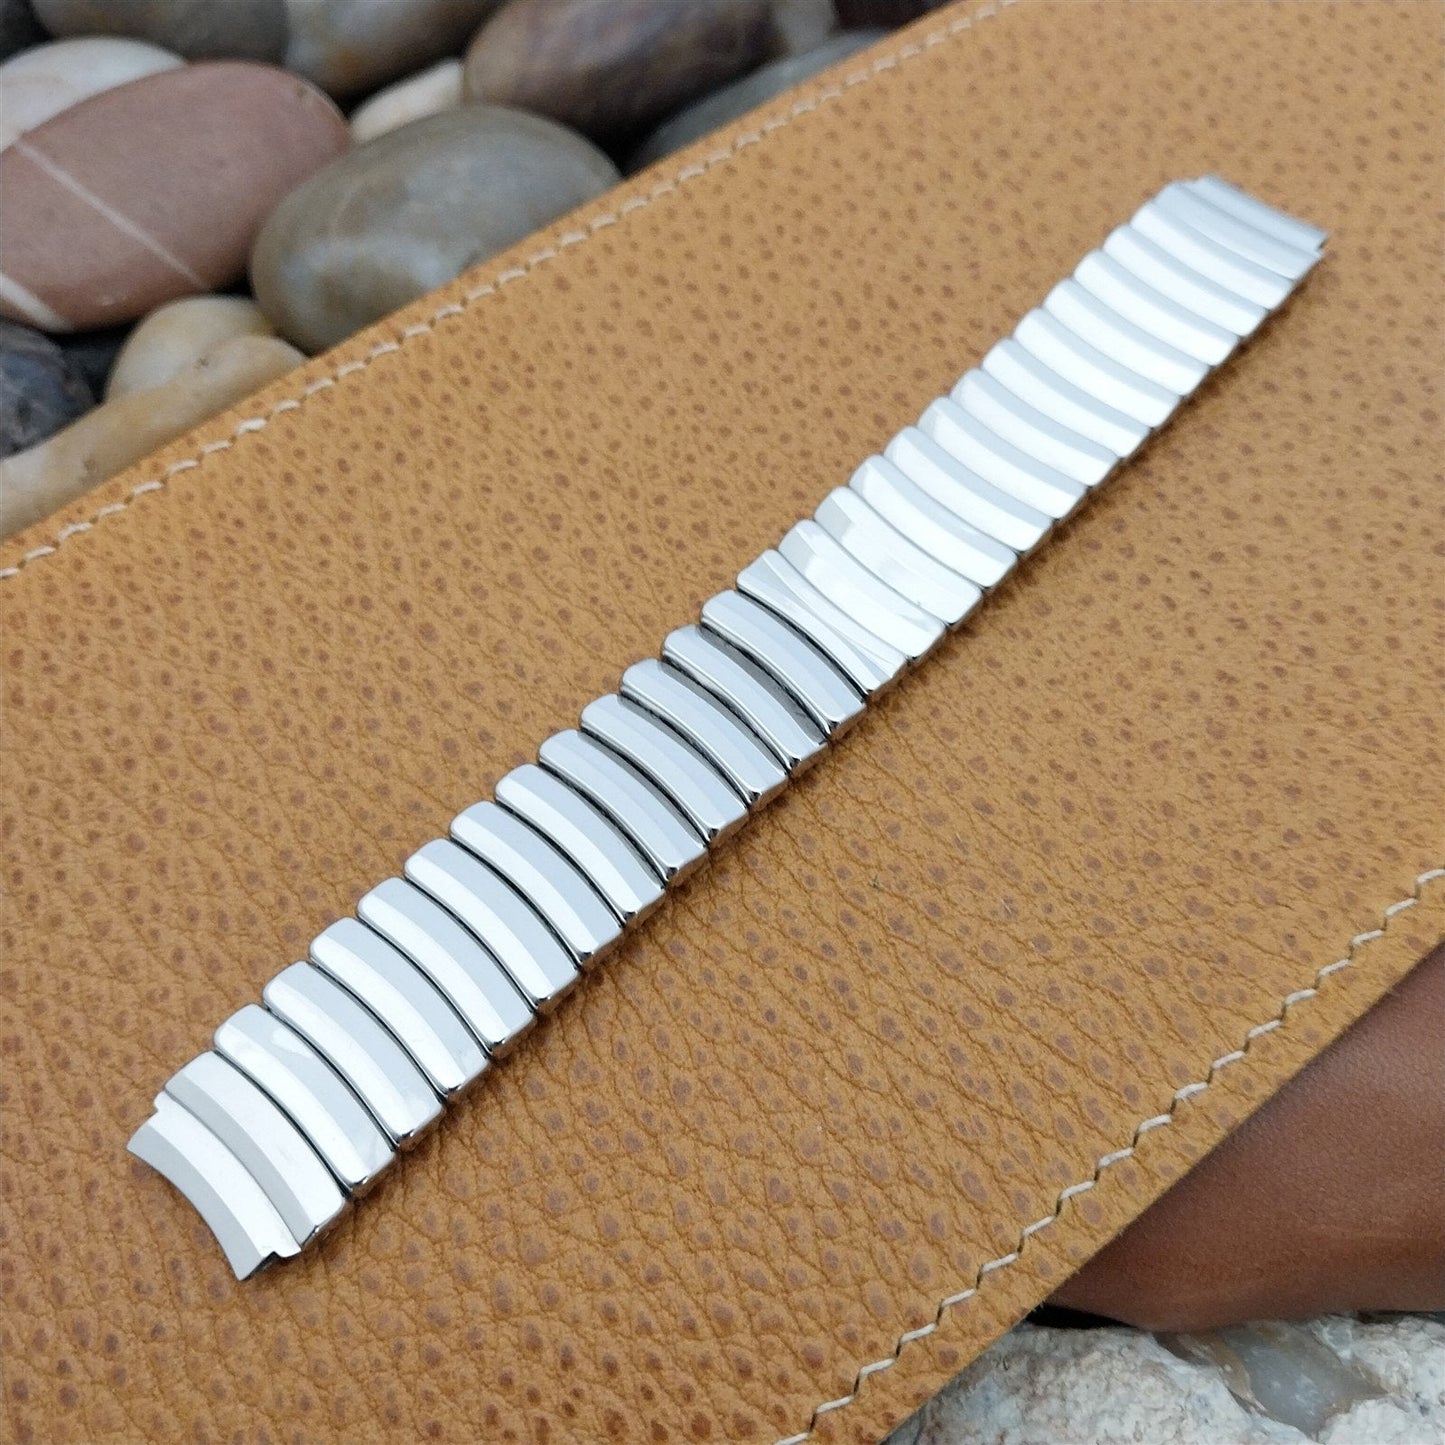 9/16" Stainless Steel JB Champion USA Wide Unused 1950s nos Vintage Watch Band